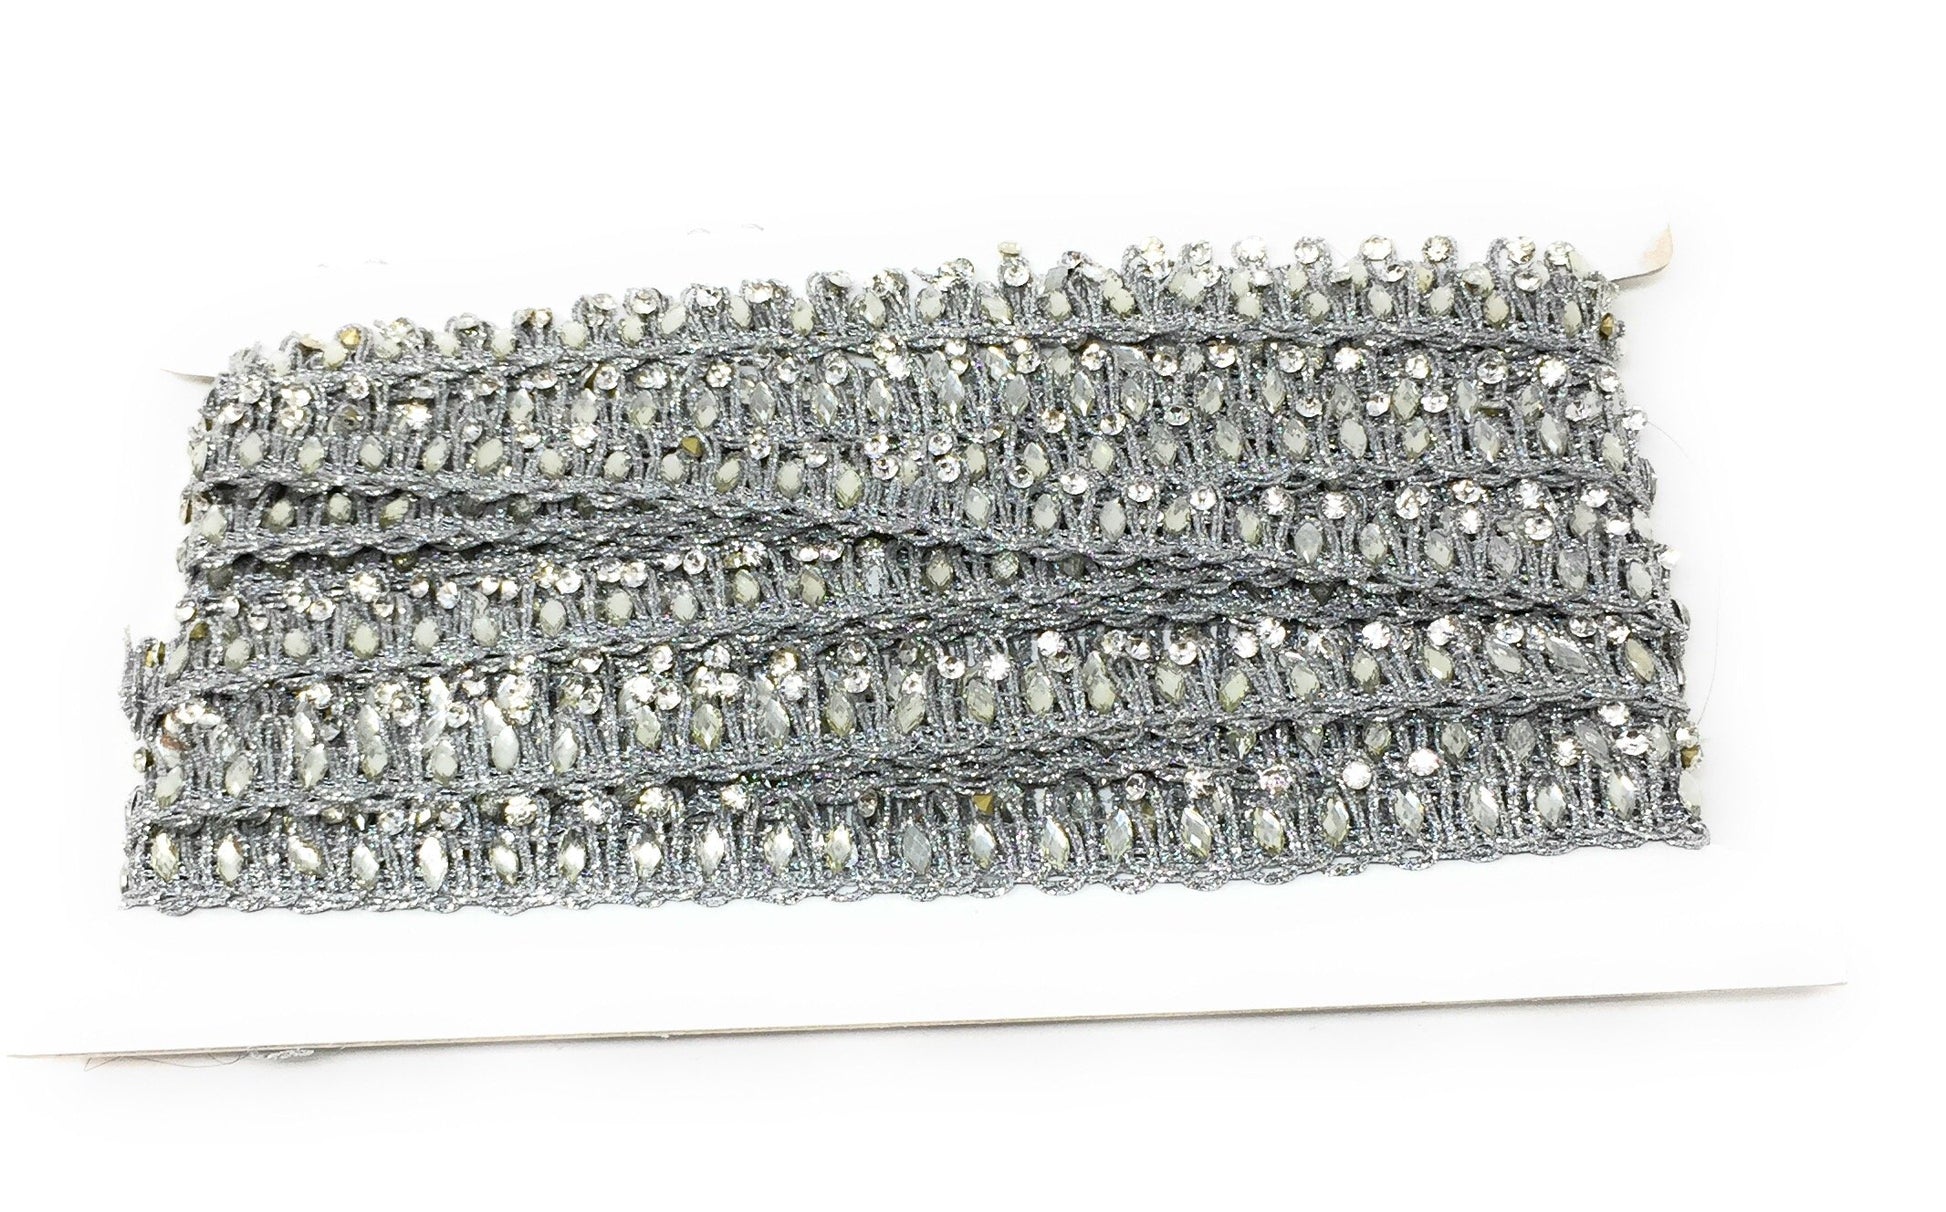 Silver Beaded Sequins Saree Border Trim - 9 Meter Roll